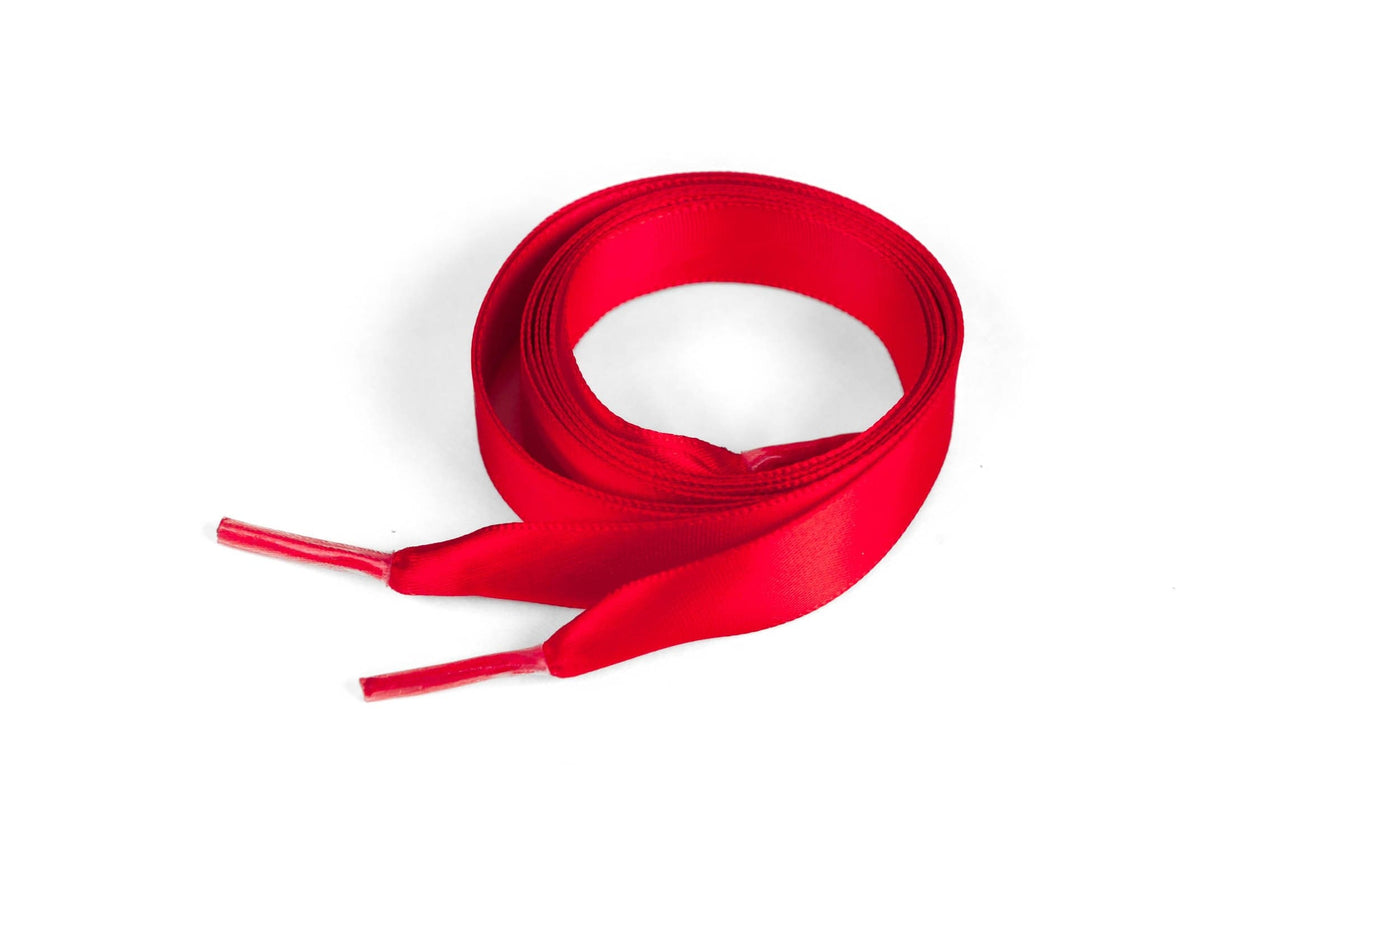 Satin Ribbon 5/8" Premium Quality Shoelaces - 96" Inch Length Red